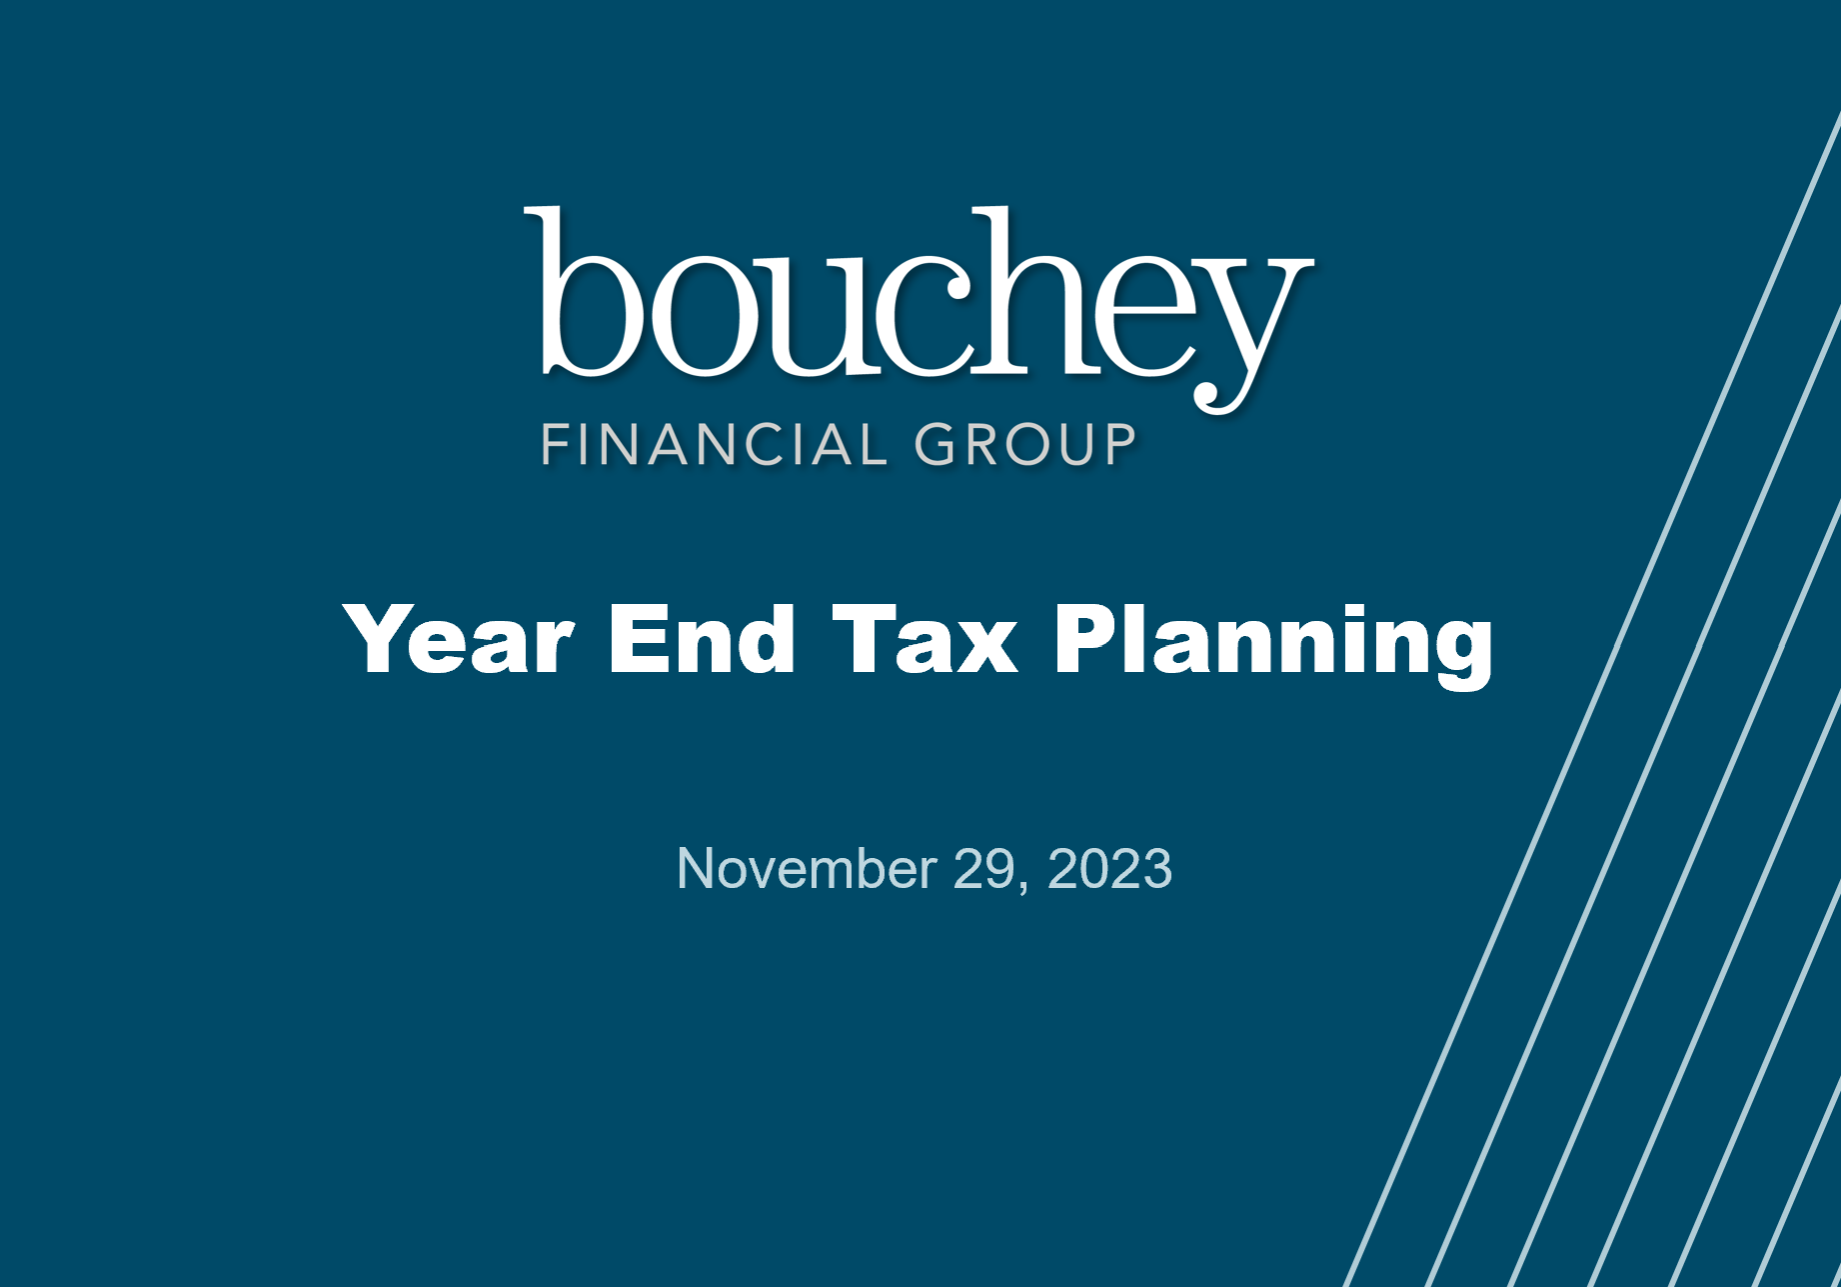 Year End Tax Planning Image